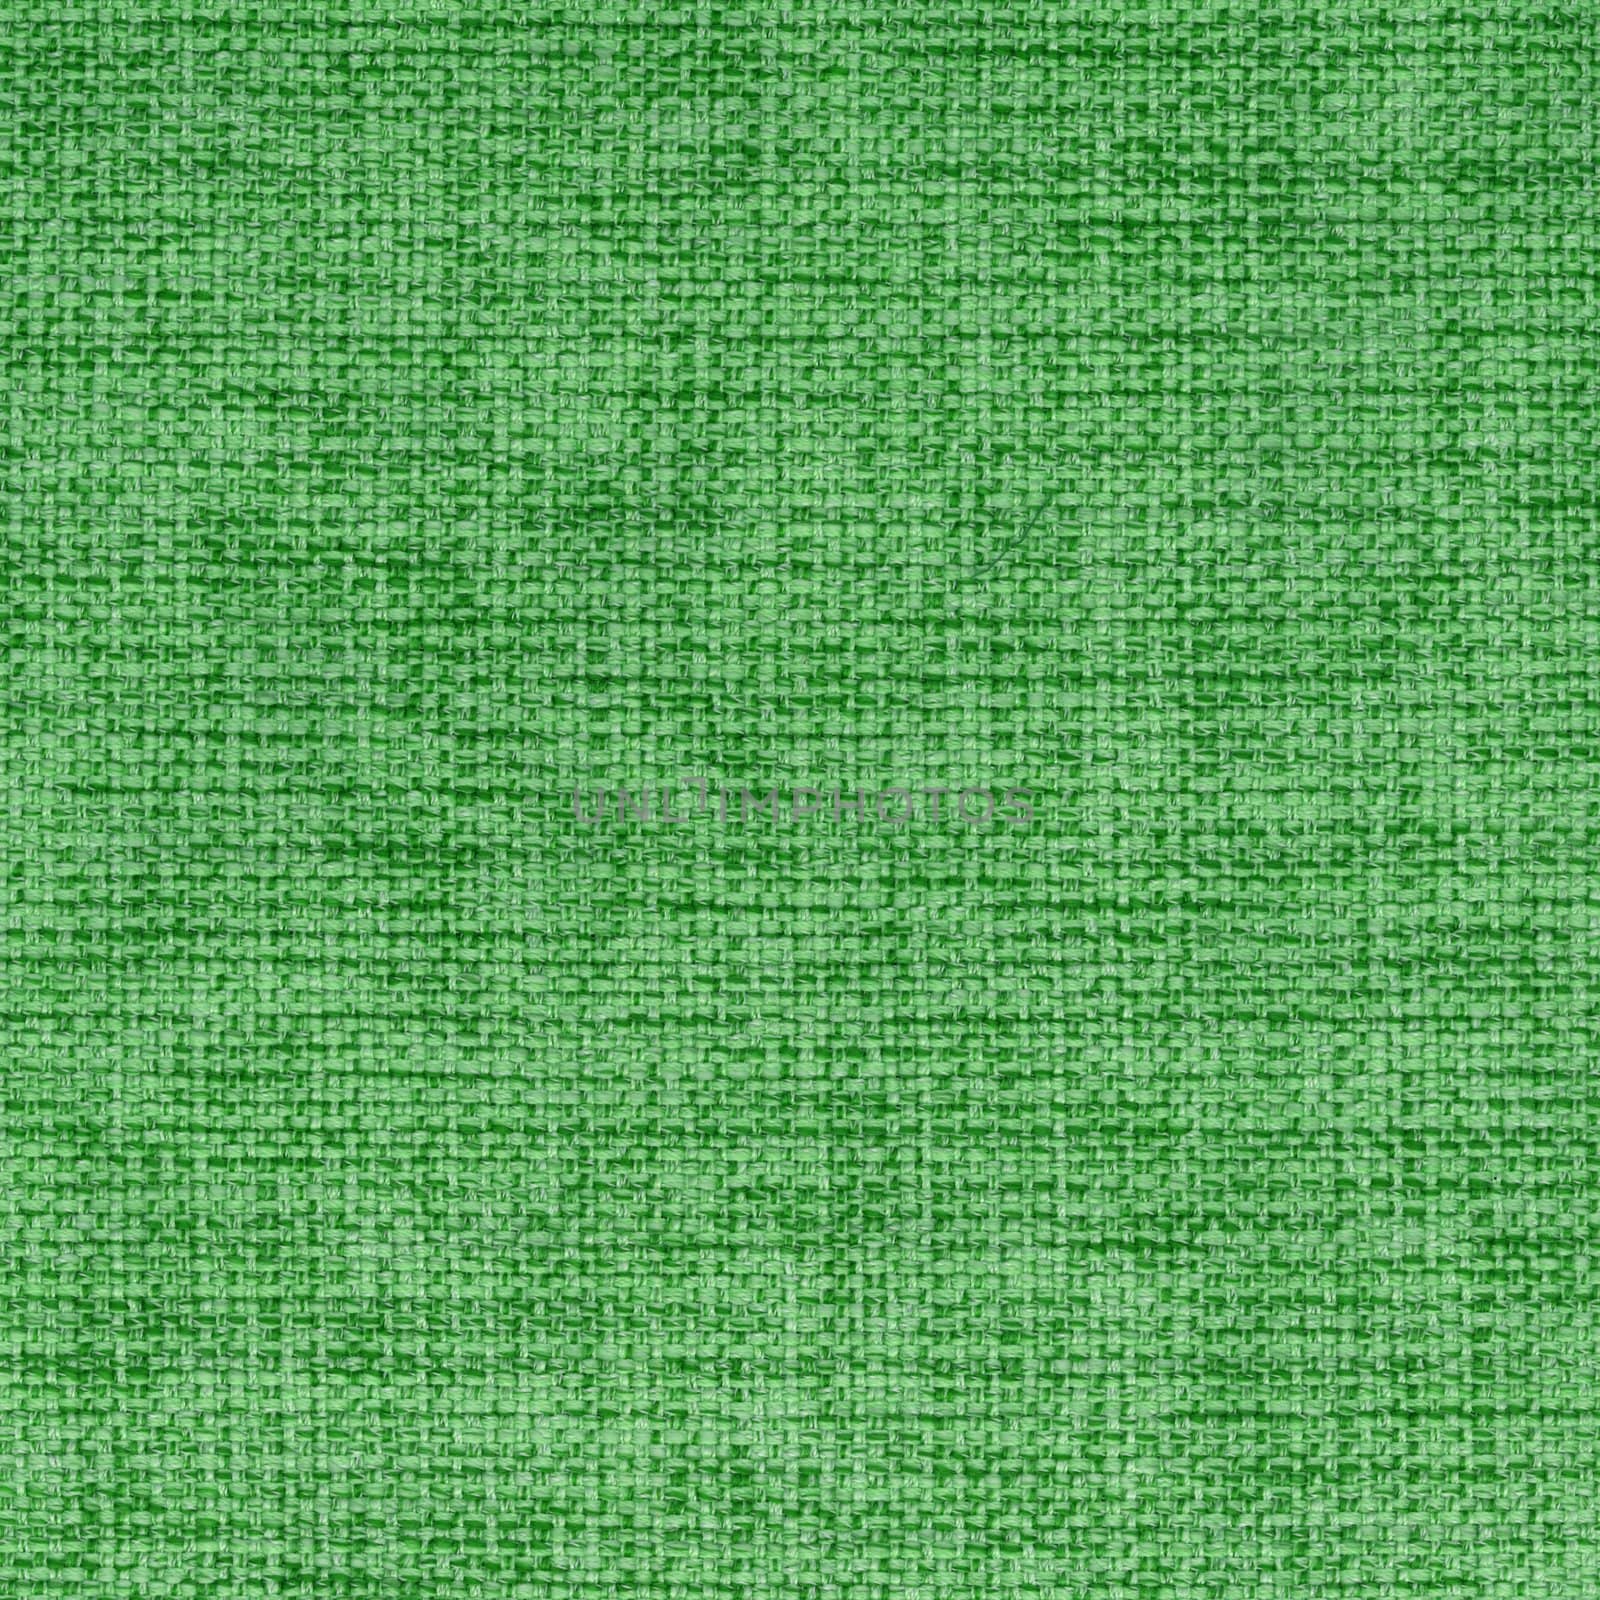 Green Fabric Texture (High.res.scan) by mg1408